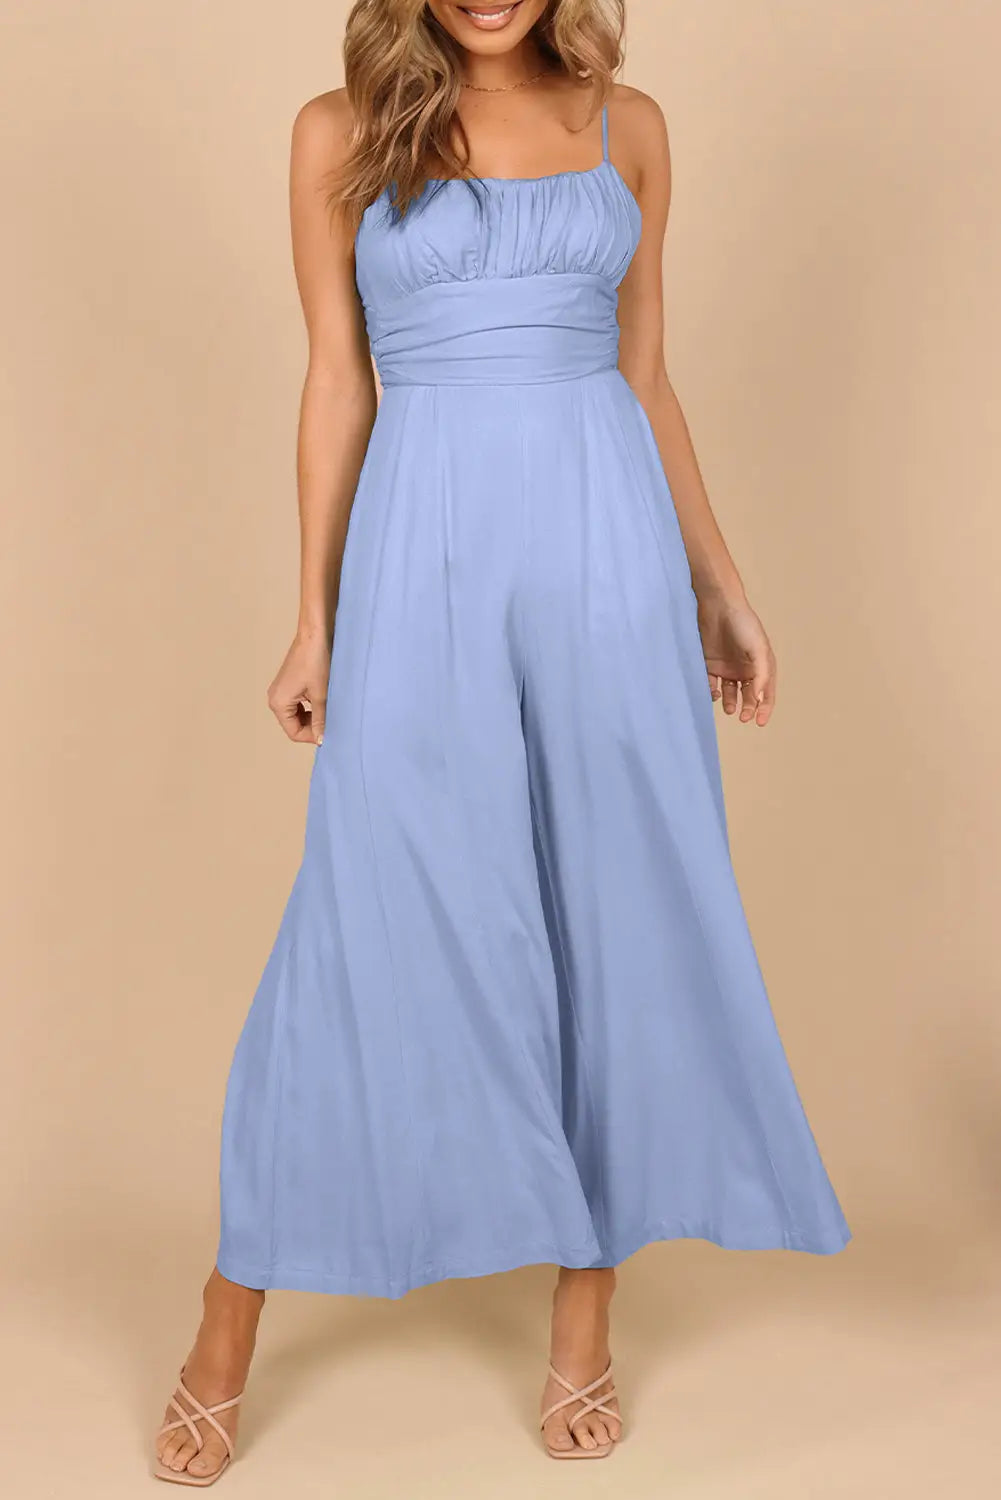 Black spaghetti straps backless knot wide-leg jumpsuit - sky blue / s / 100% polyester - jumpsuits & rompers